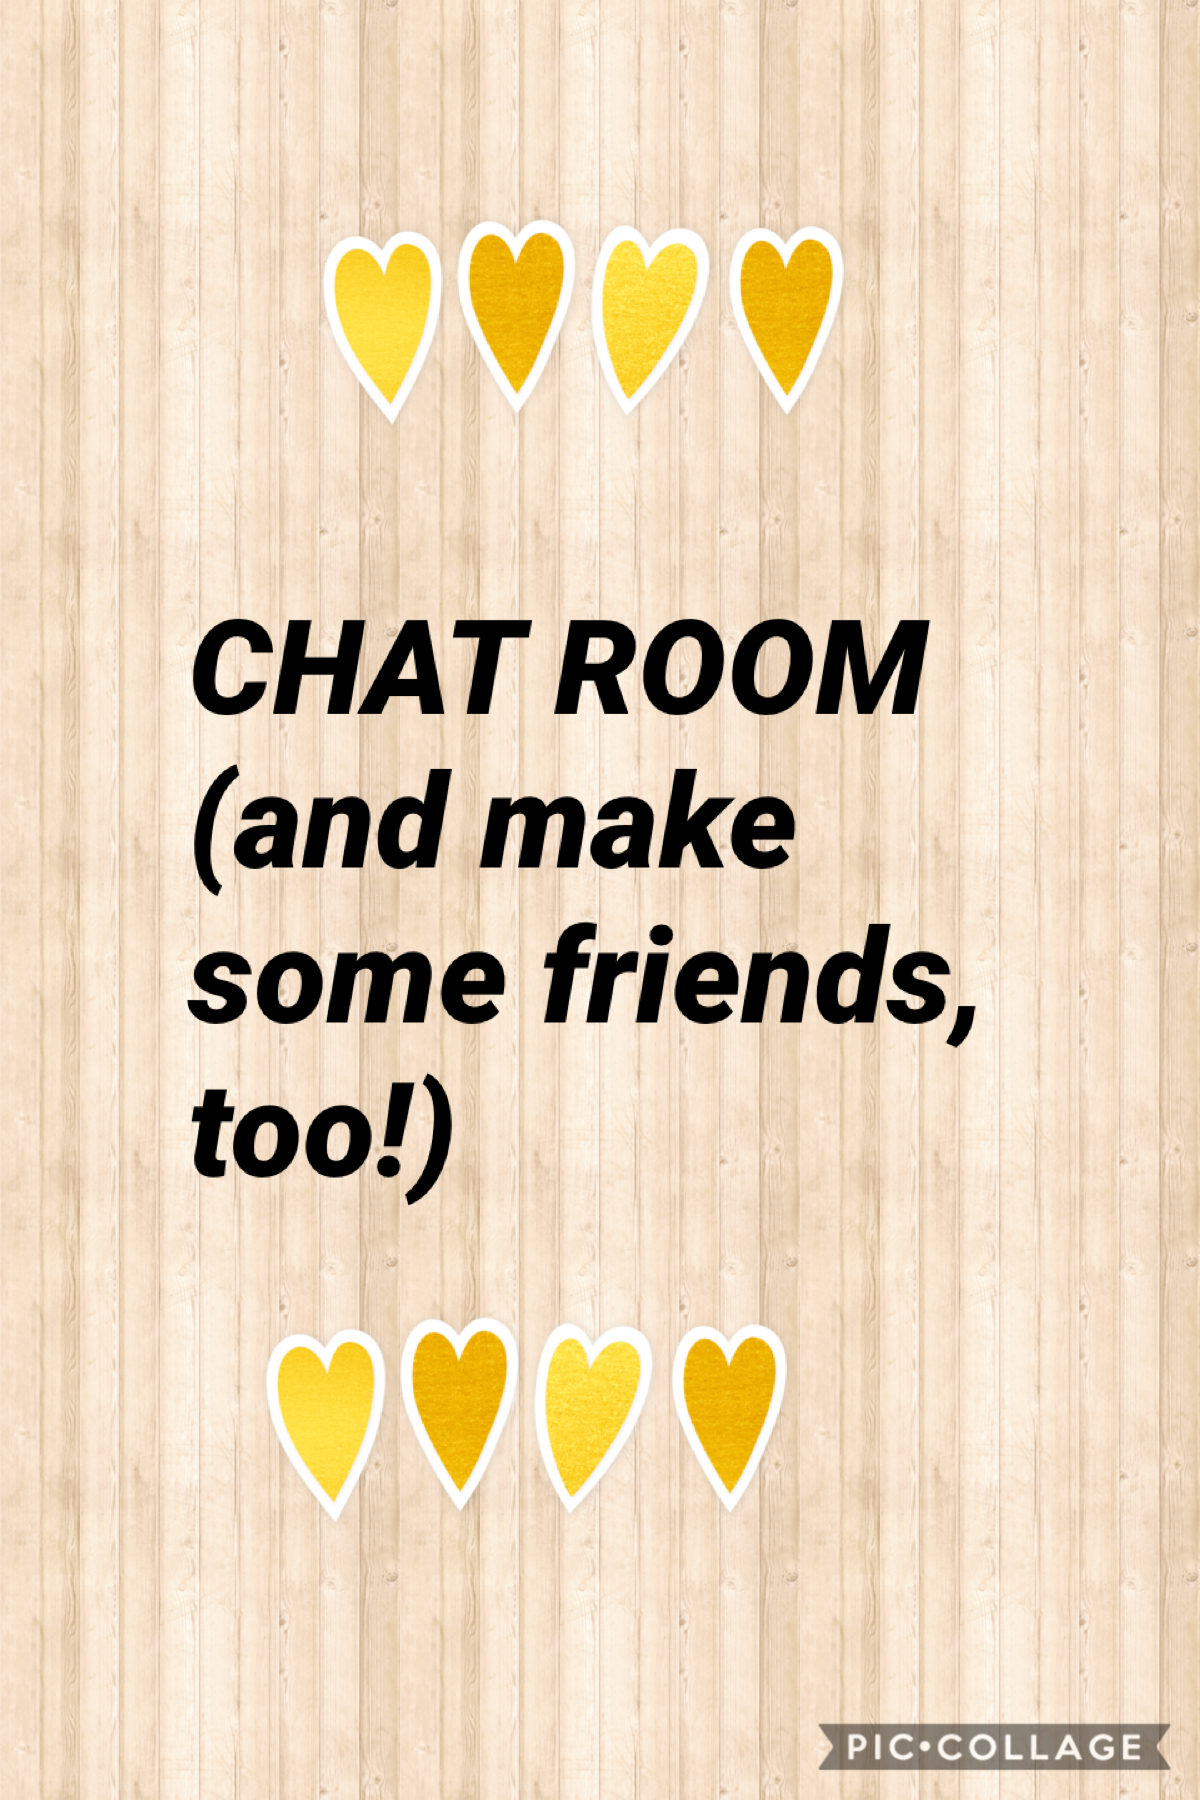 Chat (and make frands 